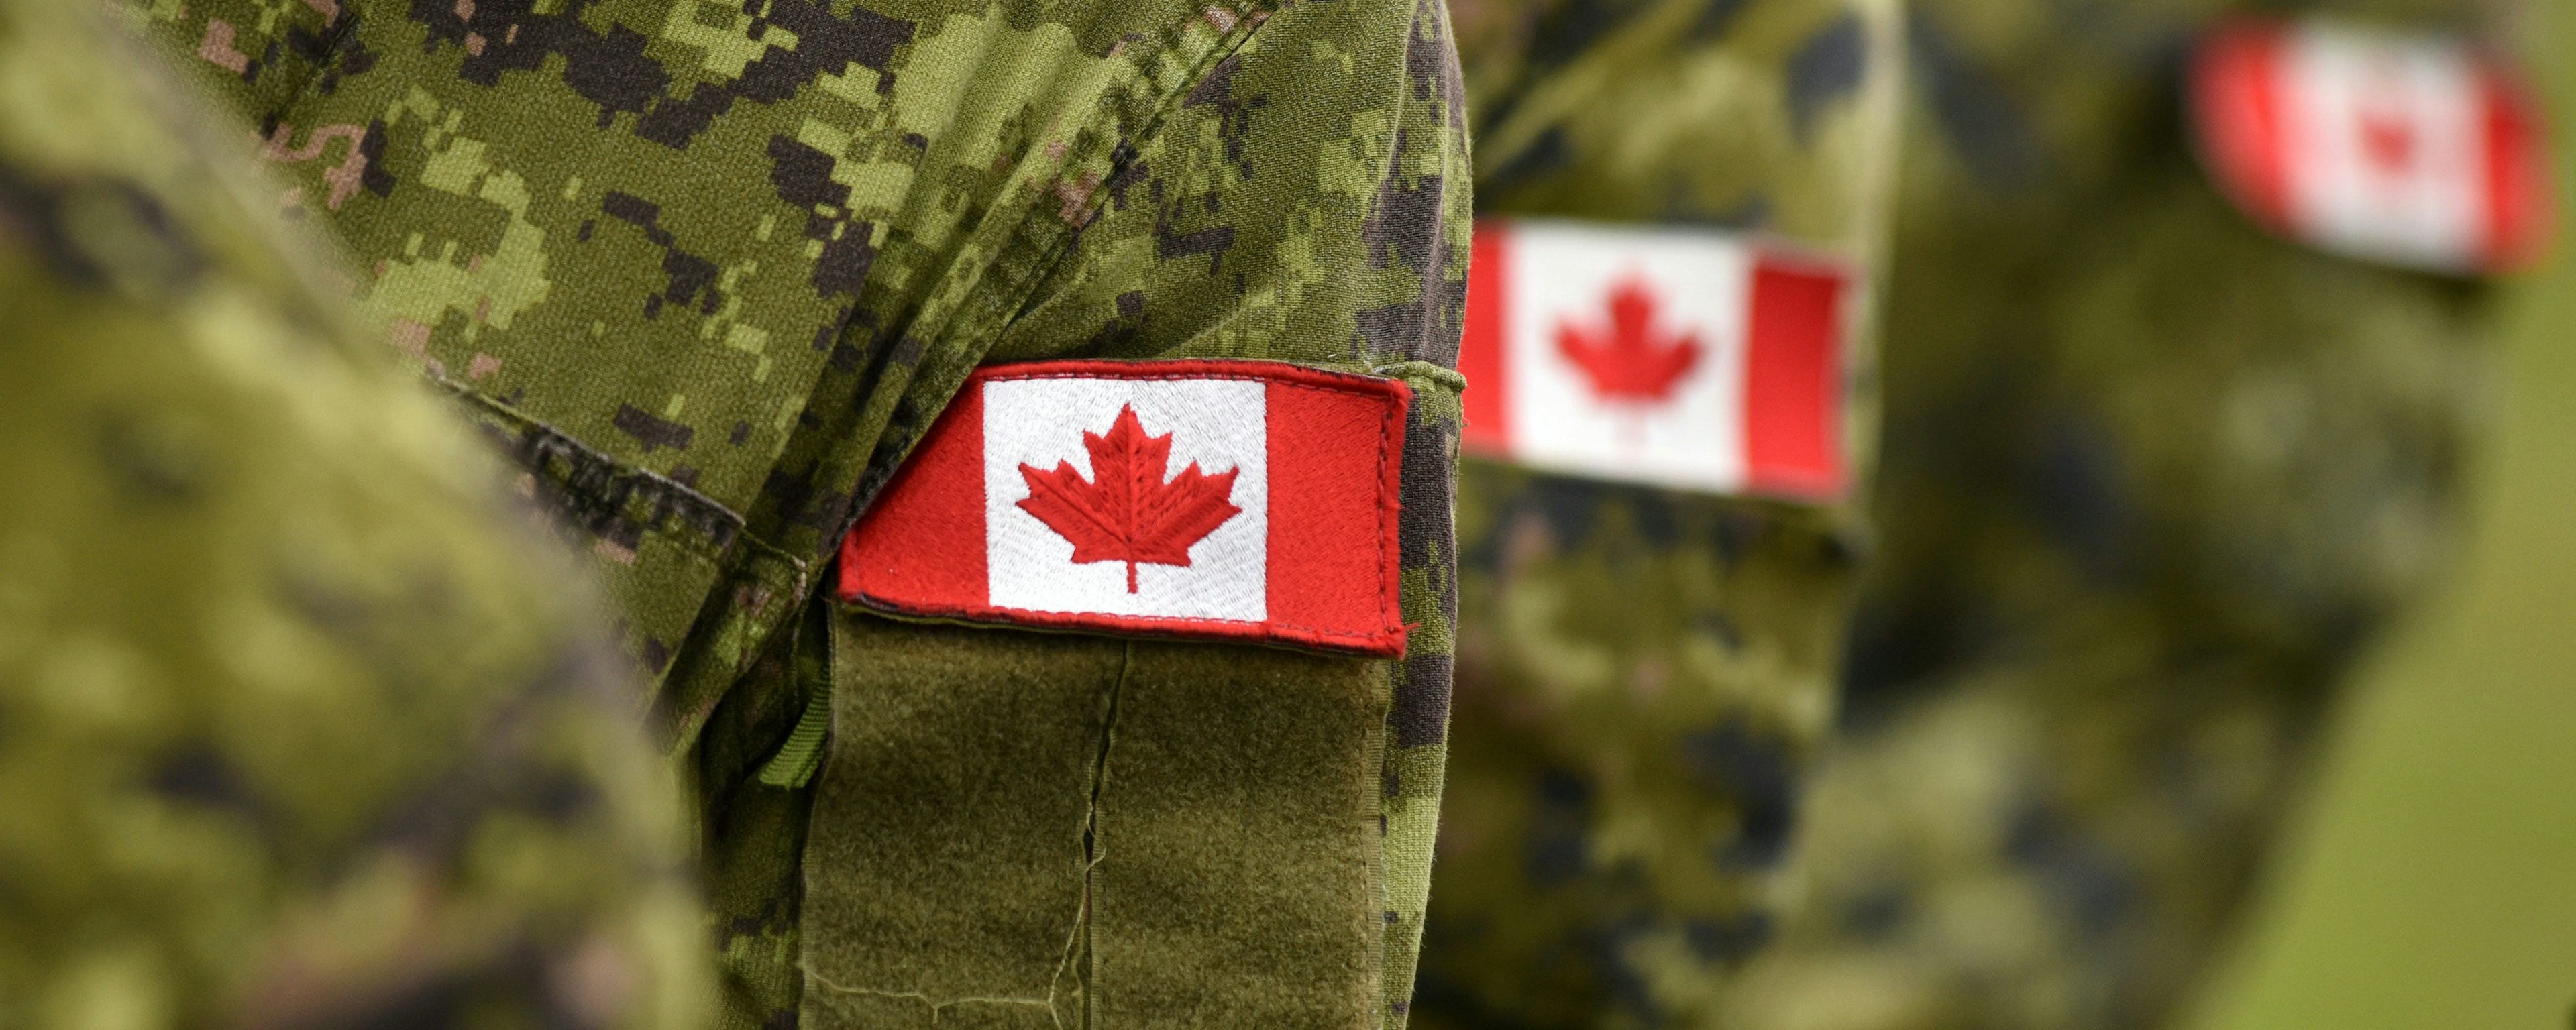 Canadian Armed Forces discount available to current service personnel on most products.